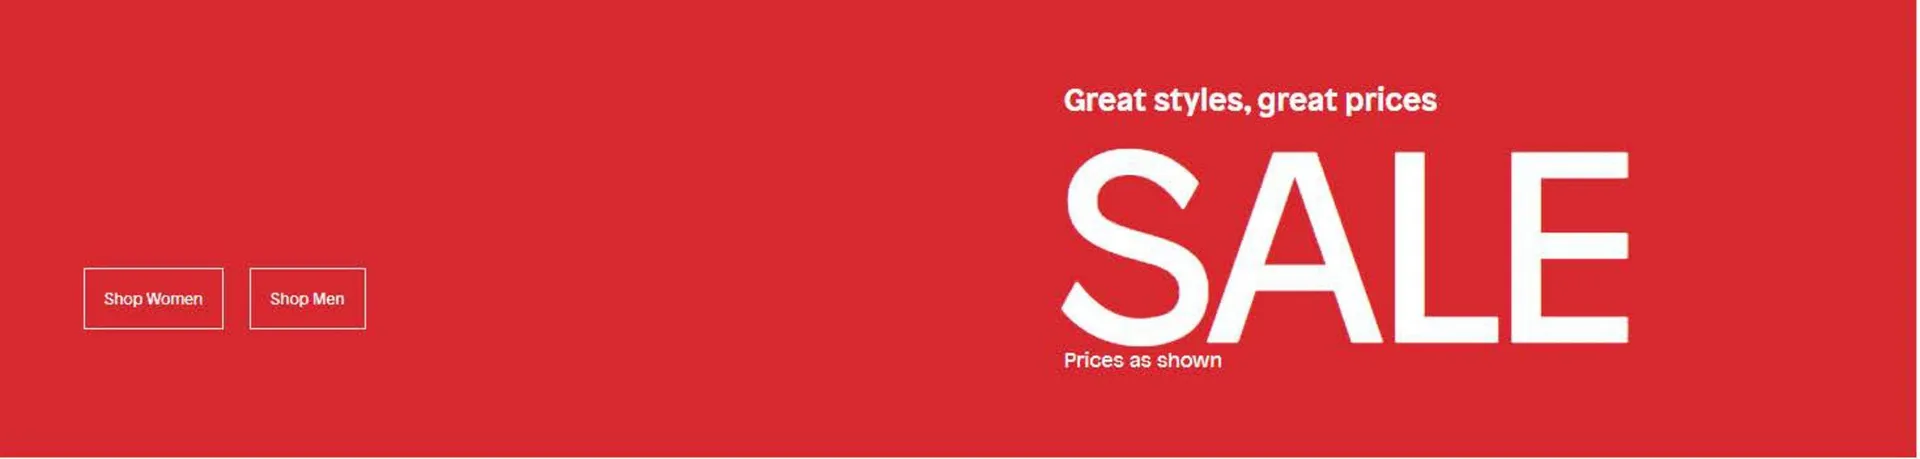 Great Styles, Great Prices! - 1